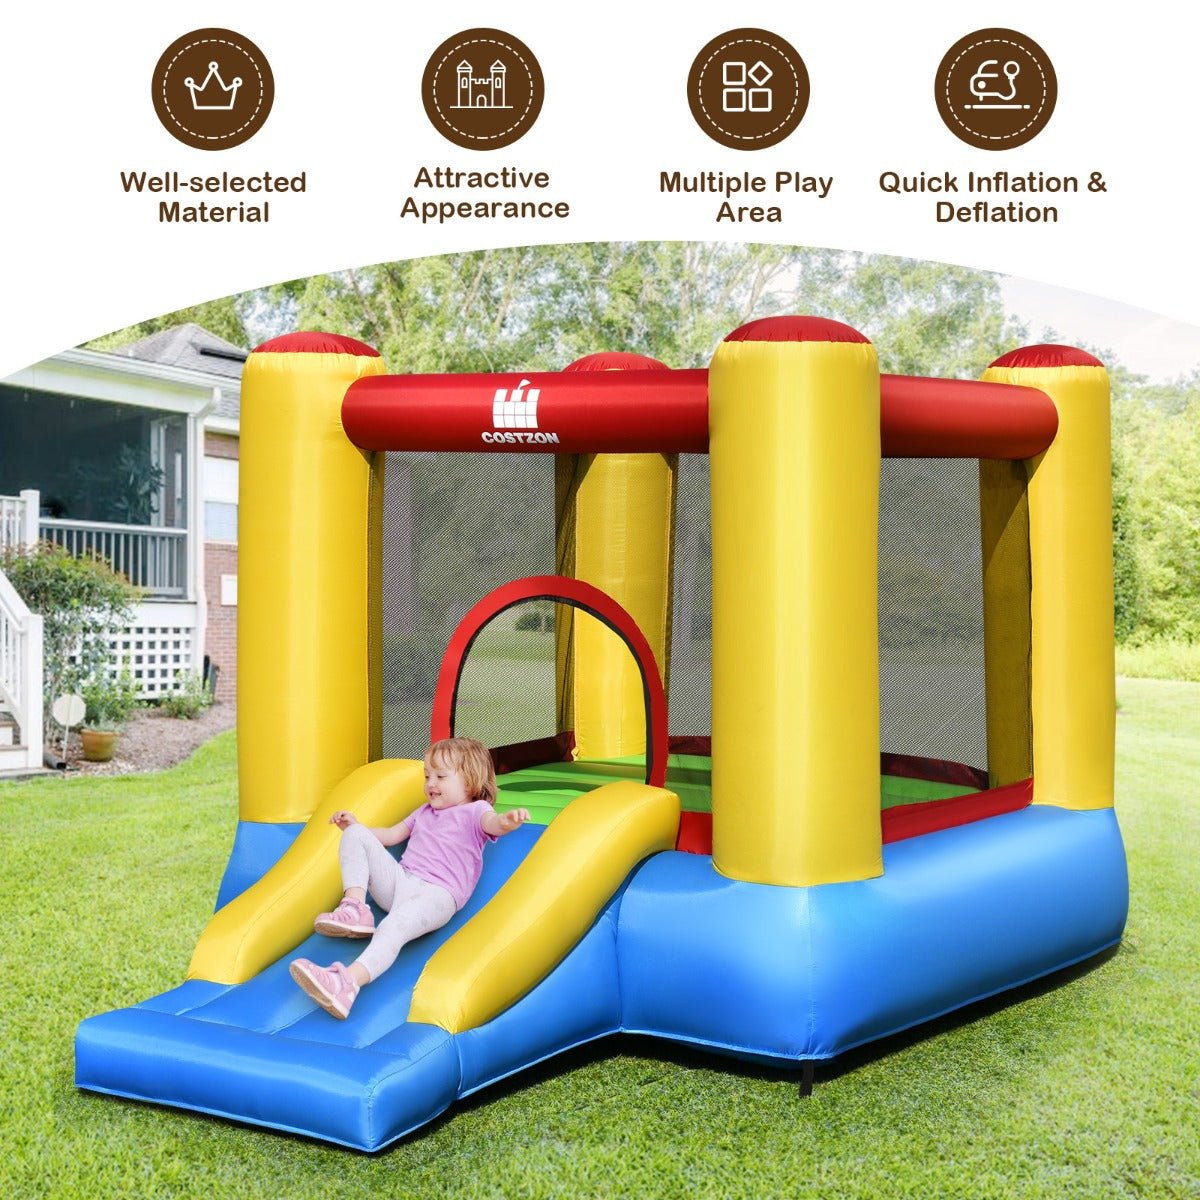 Inflatable Kids Playhouse - Bouncy House with Slide & Basketball Fun